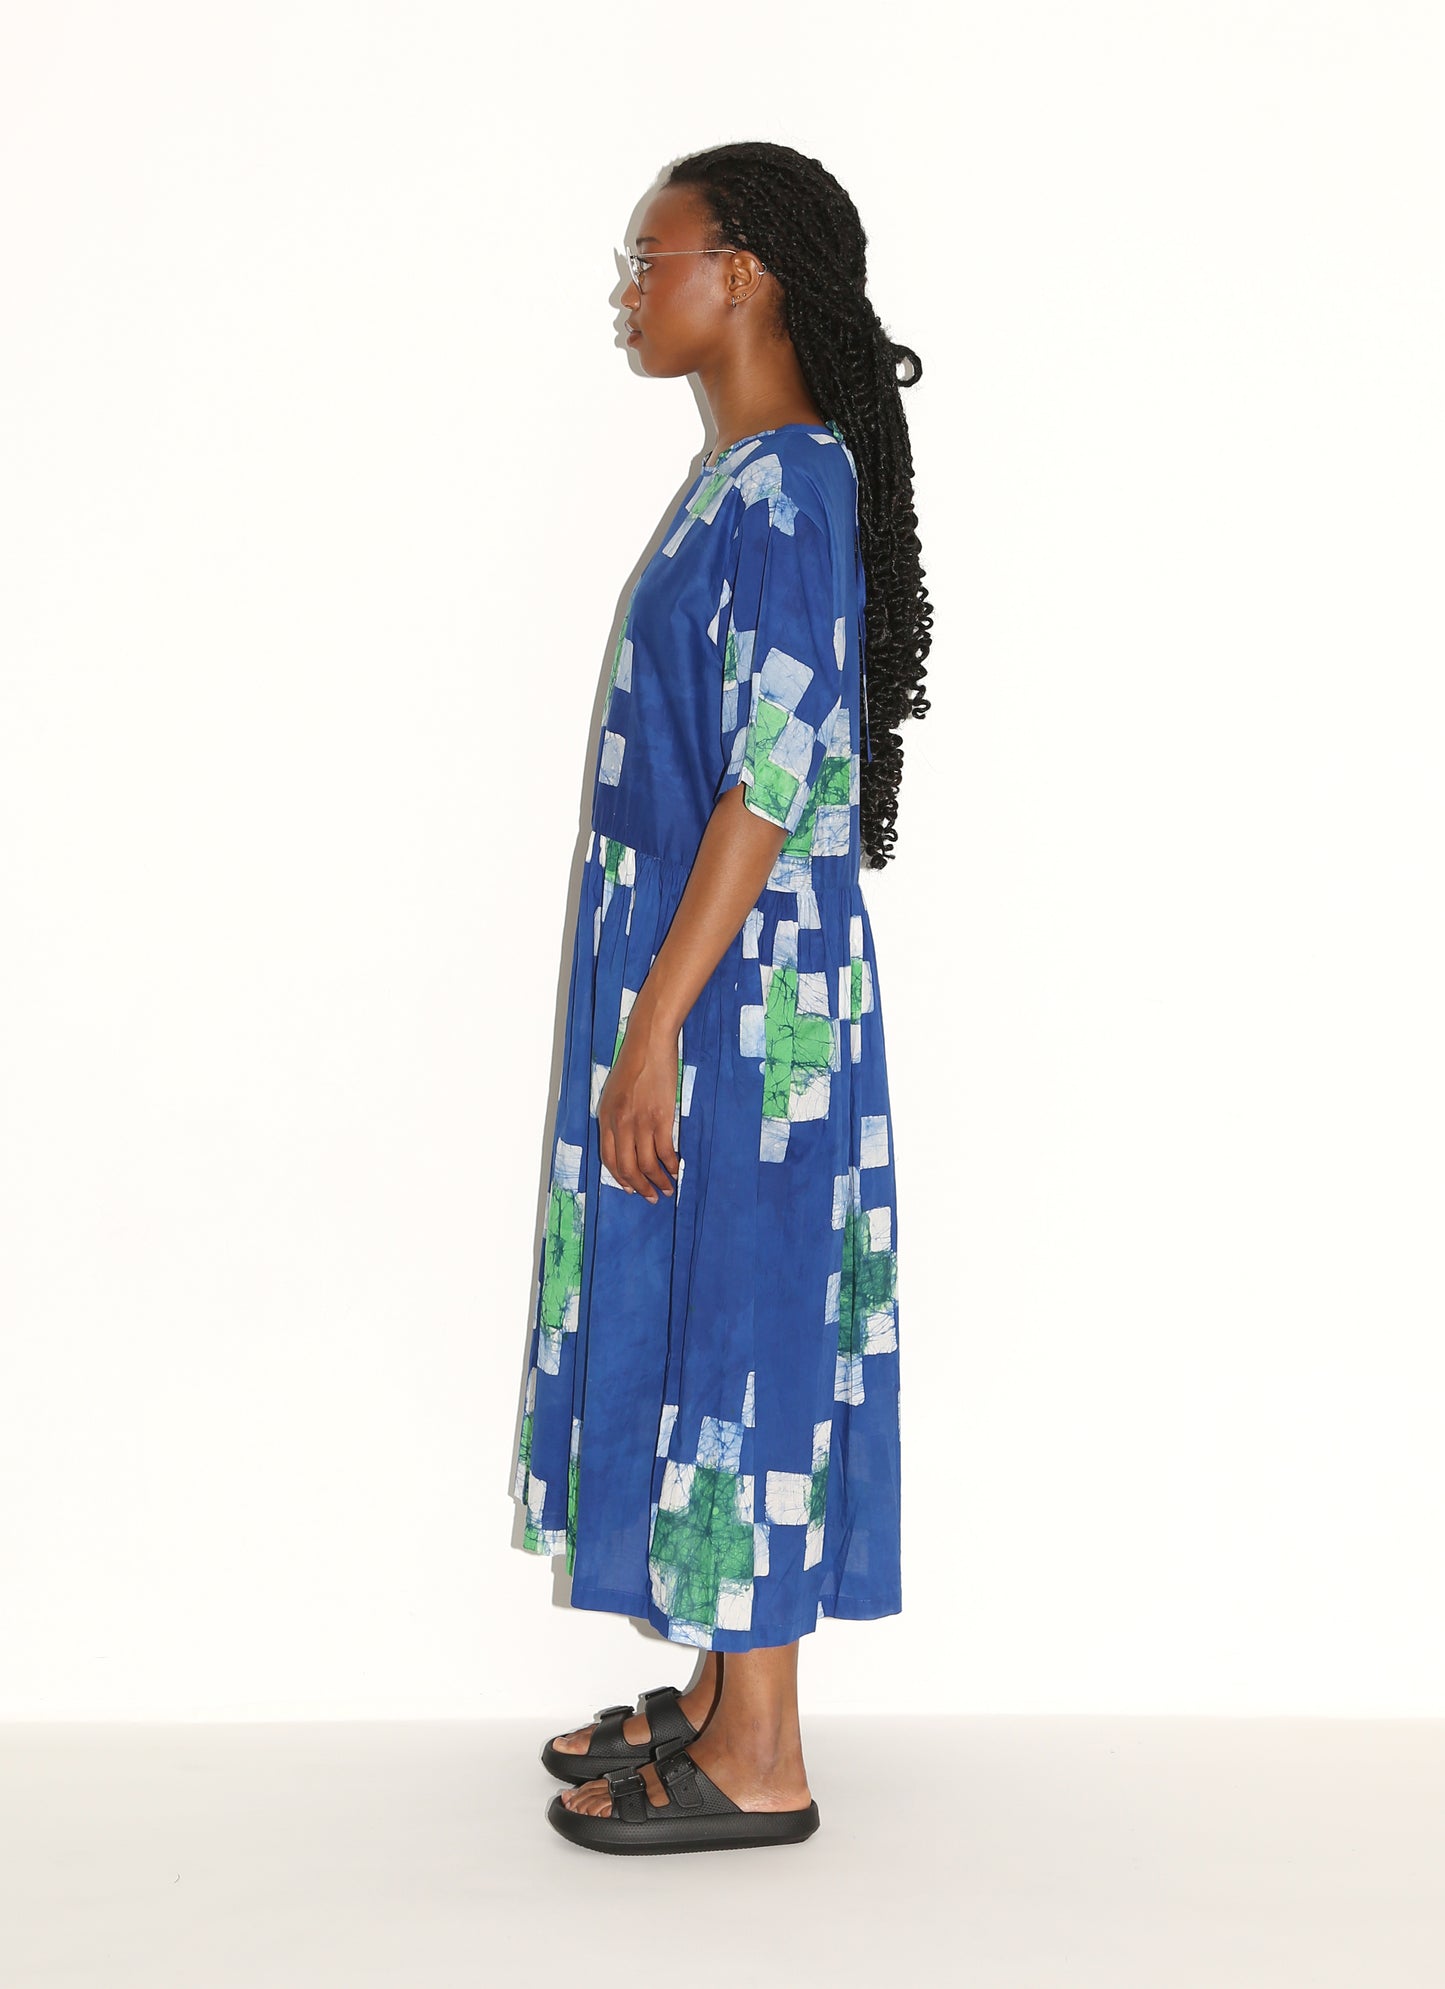 OYIBO Dress/ Blue Quilt